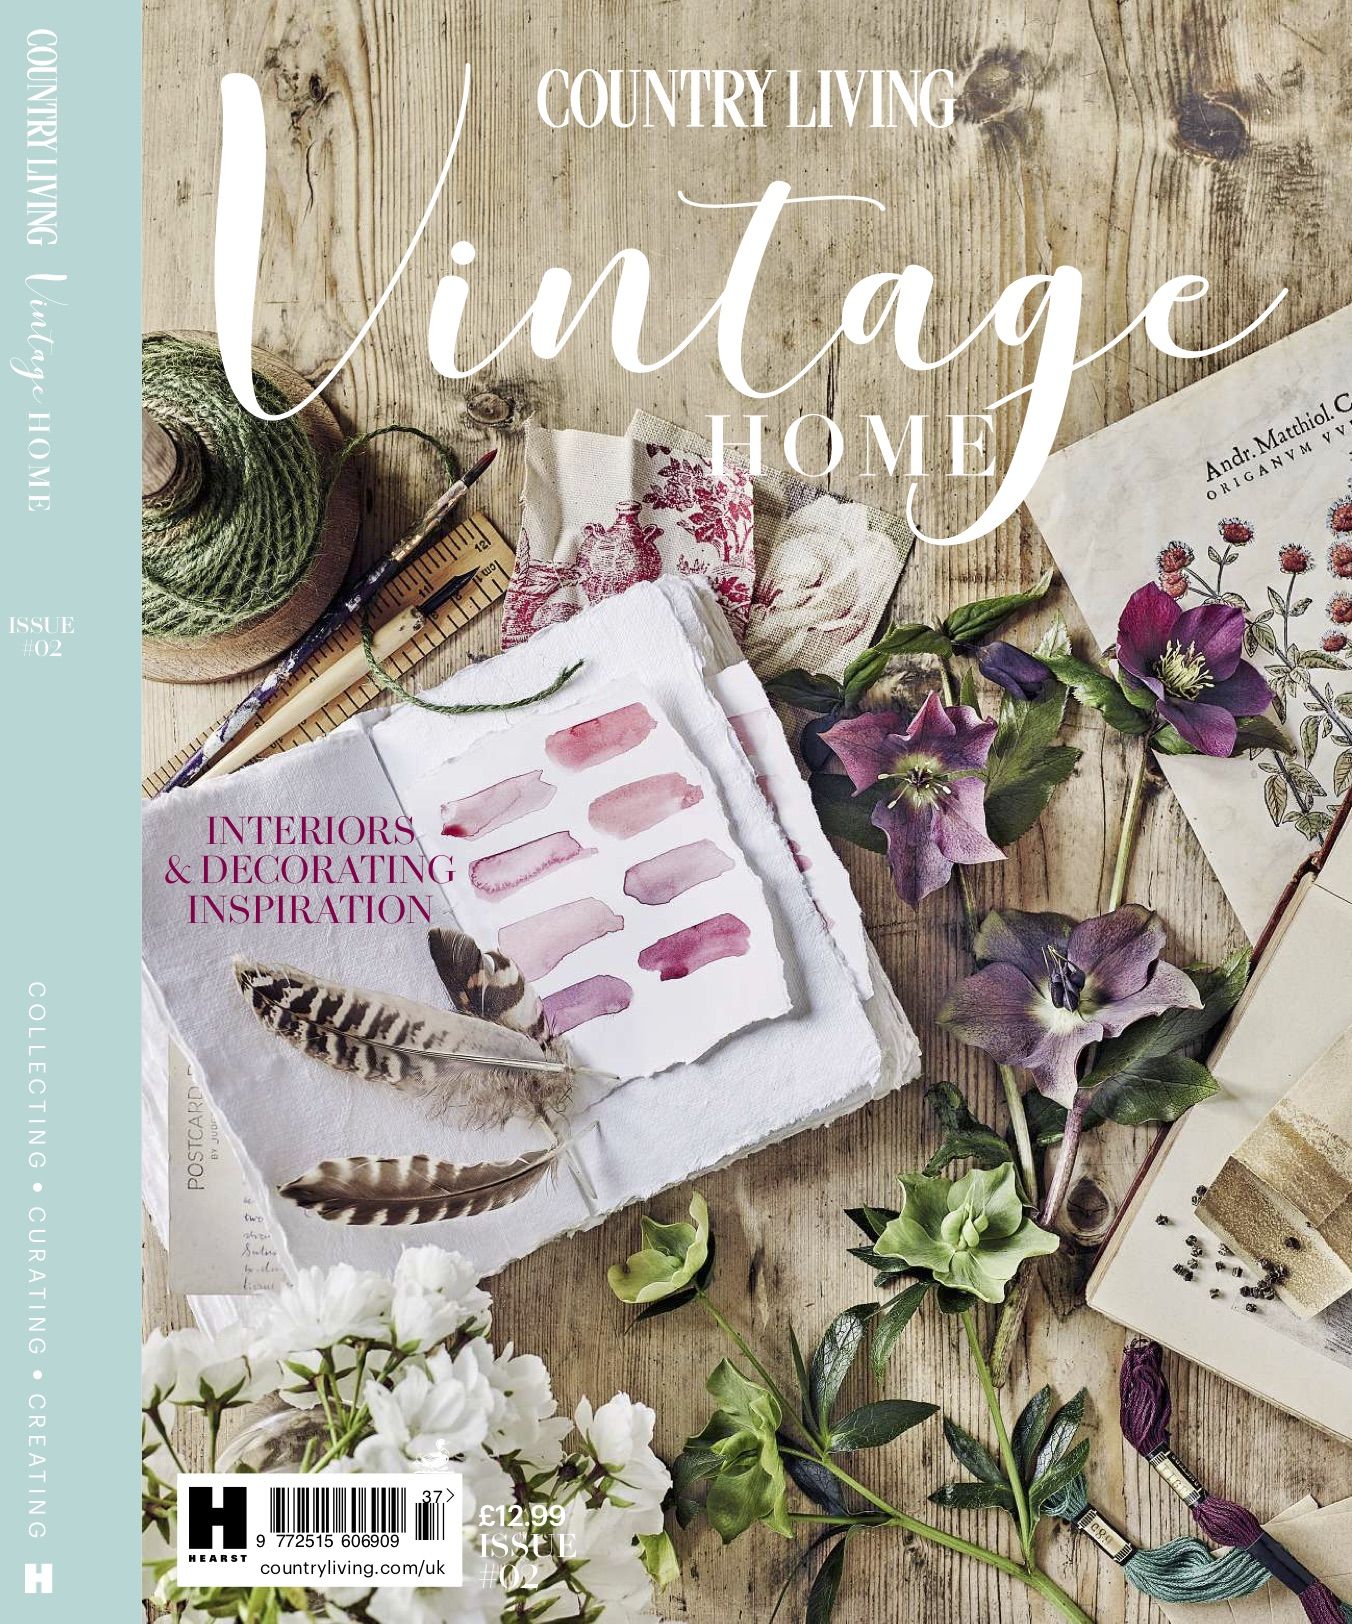 Country Living bookazine Vintage Home is out now